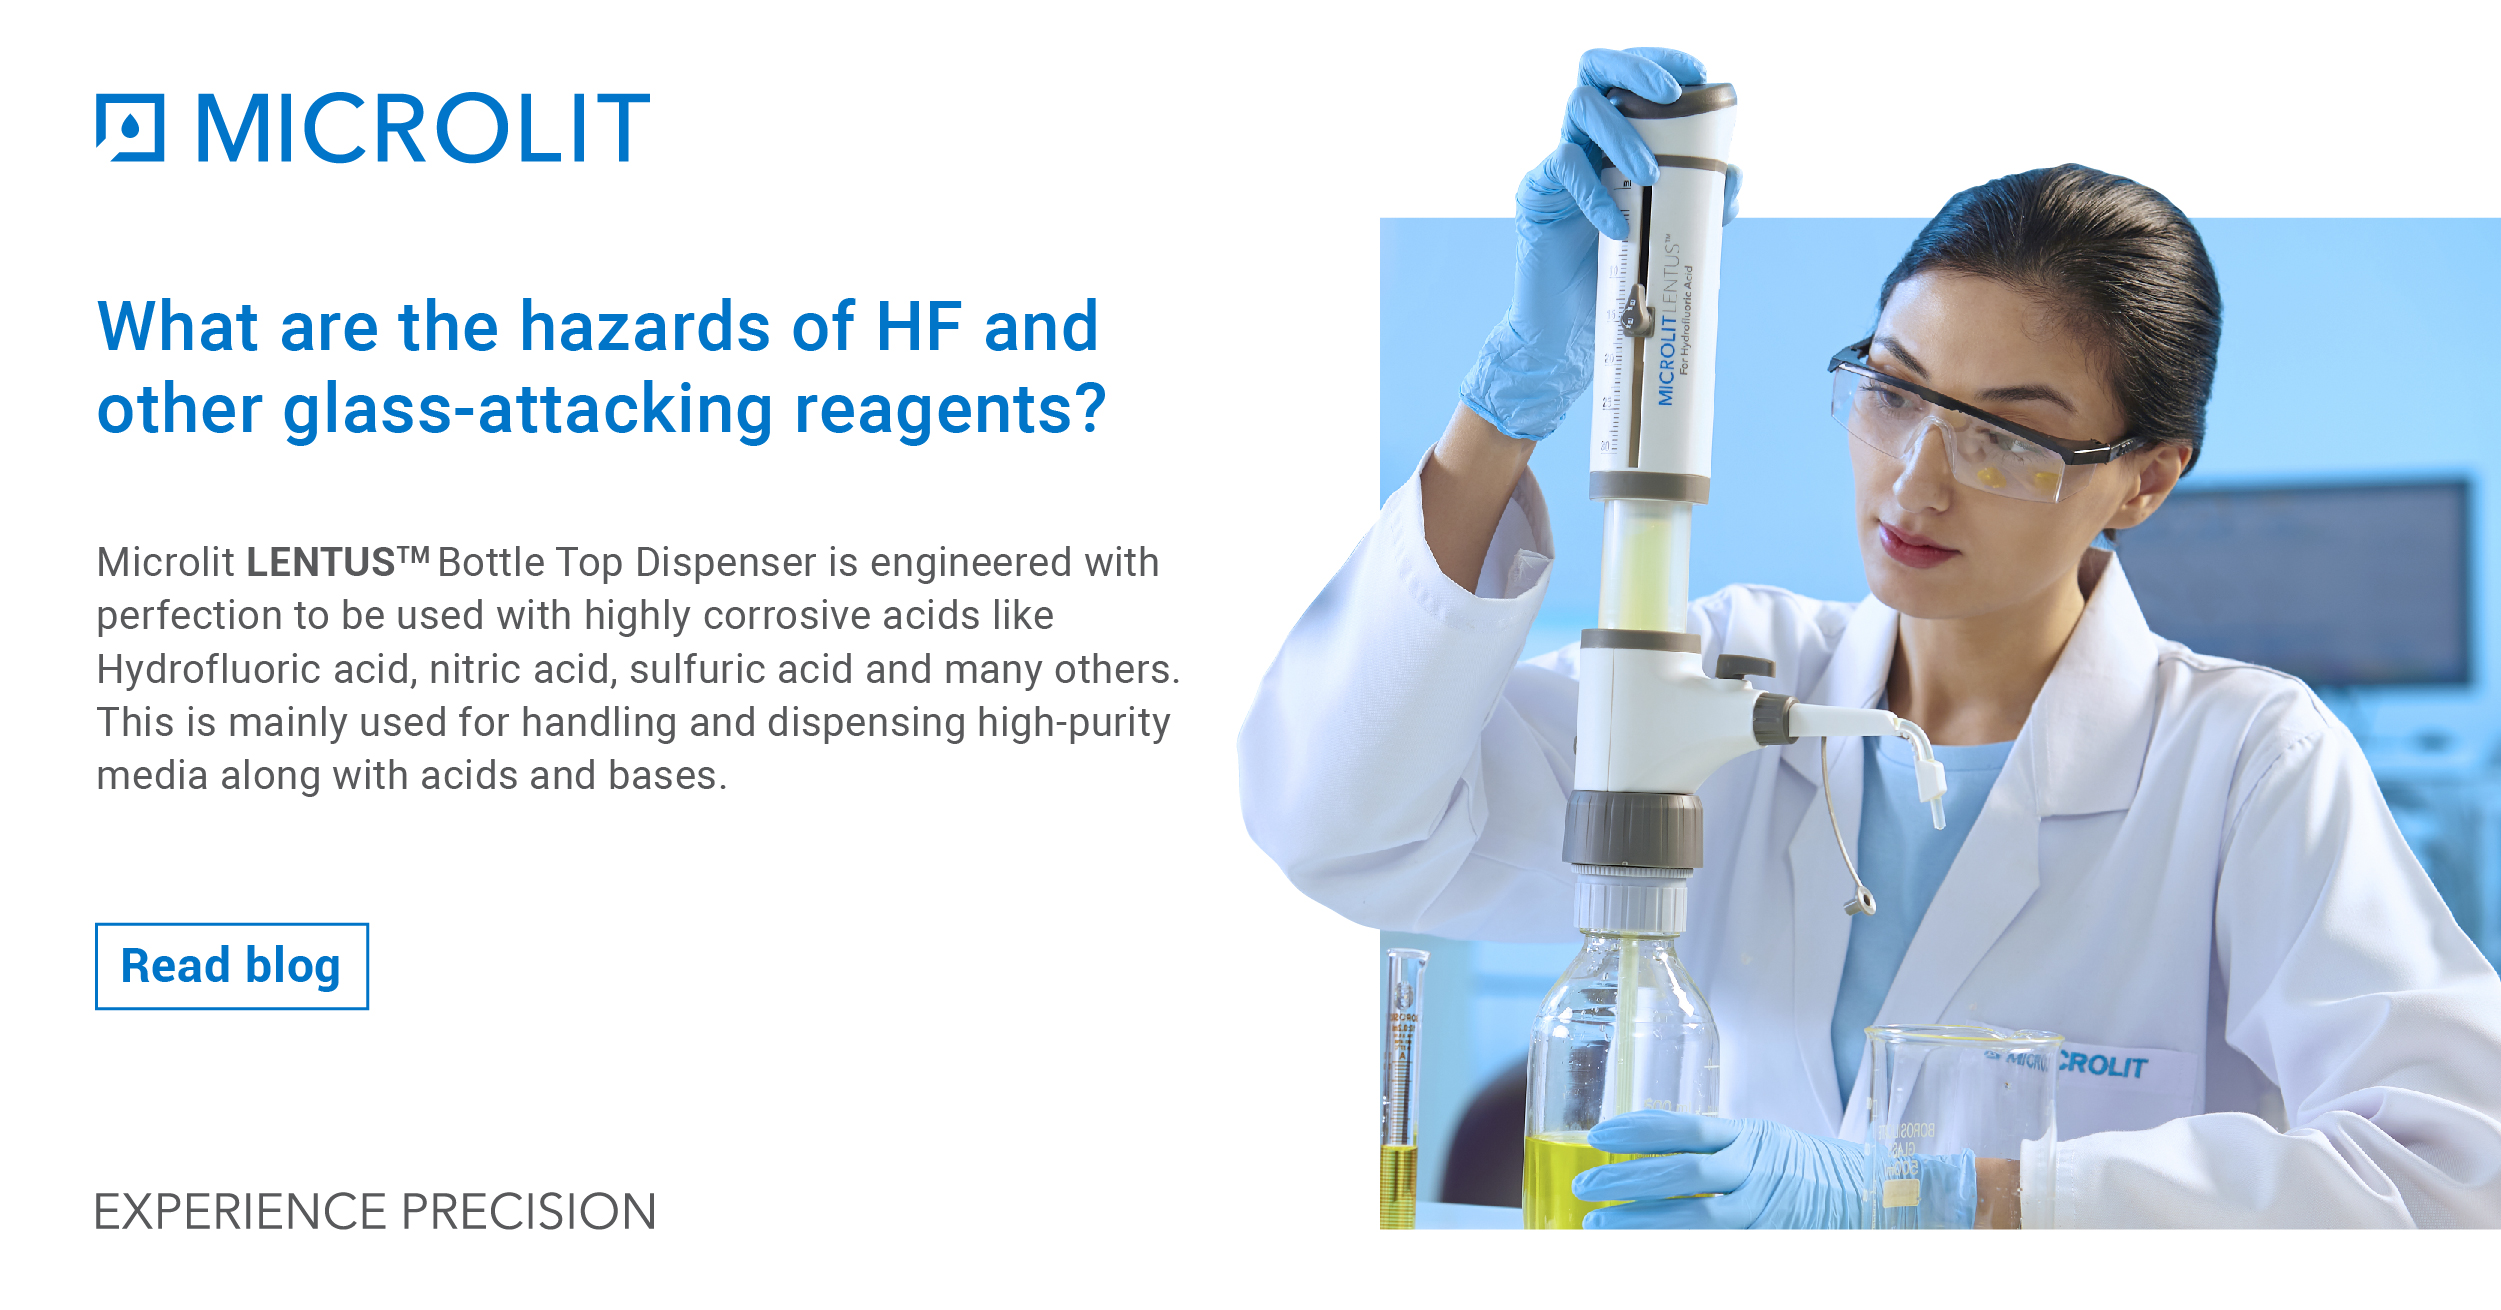 What are the hazards of HF and other glass-attacking reagents?